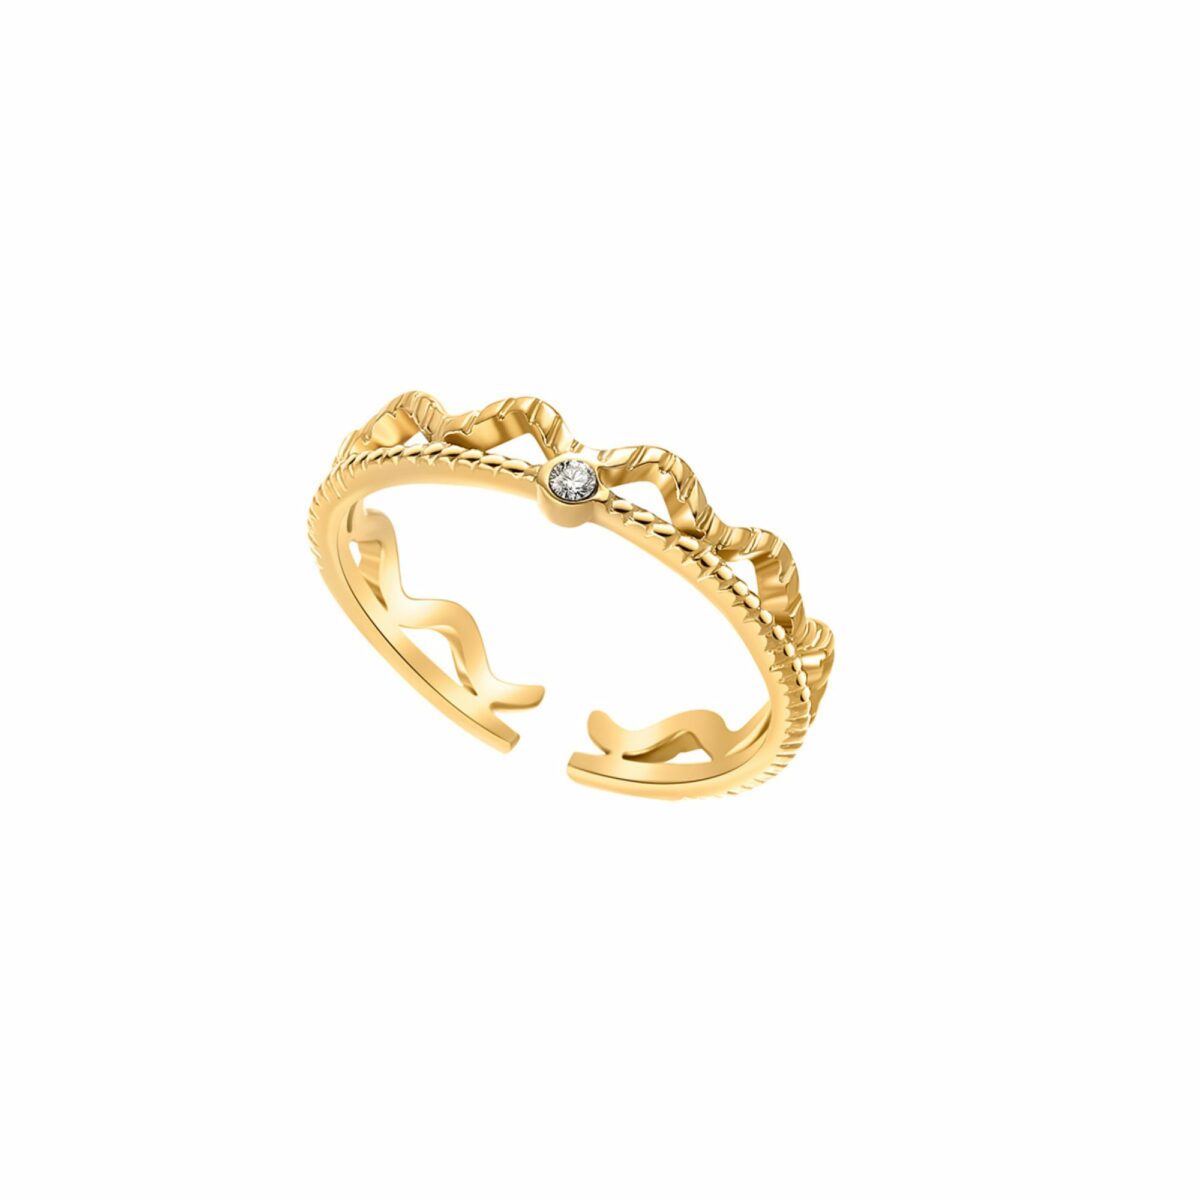 https://m.clubbella.co/product/gold-wavy-boho-ring/ 1674978392261